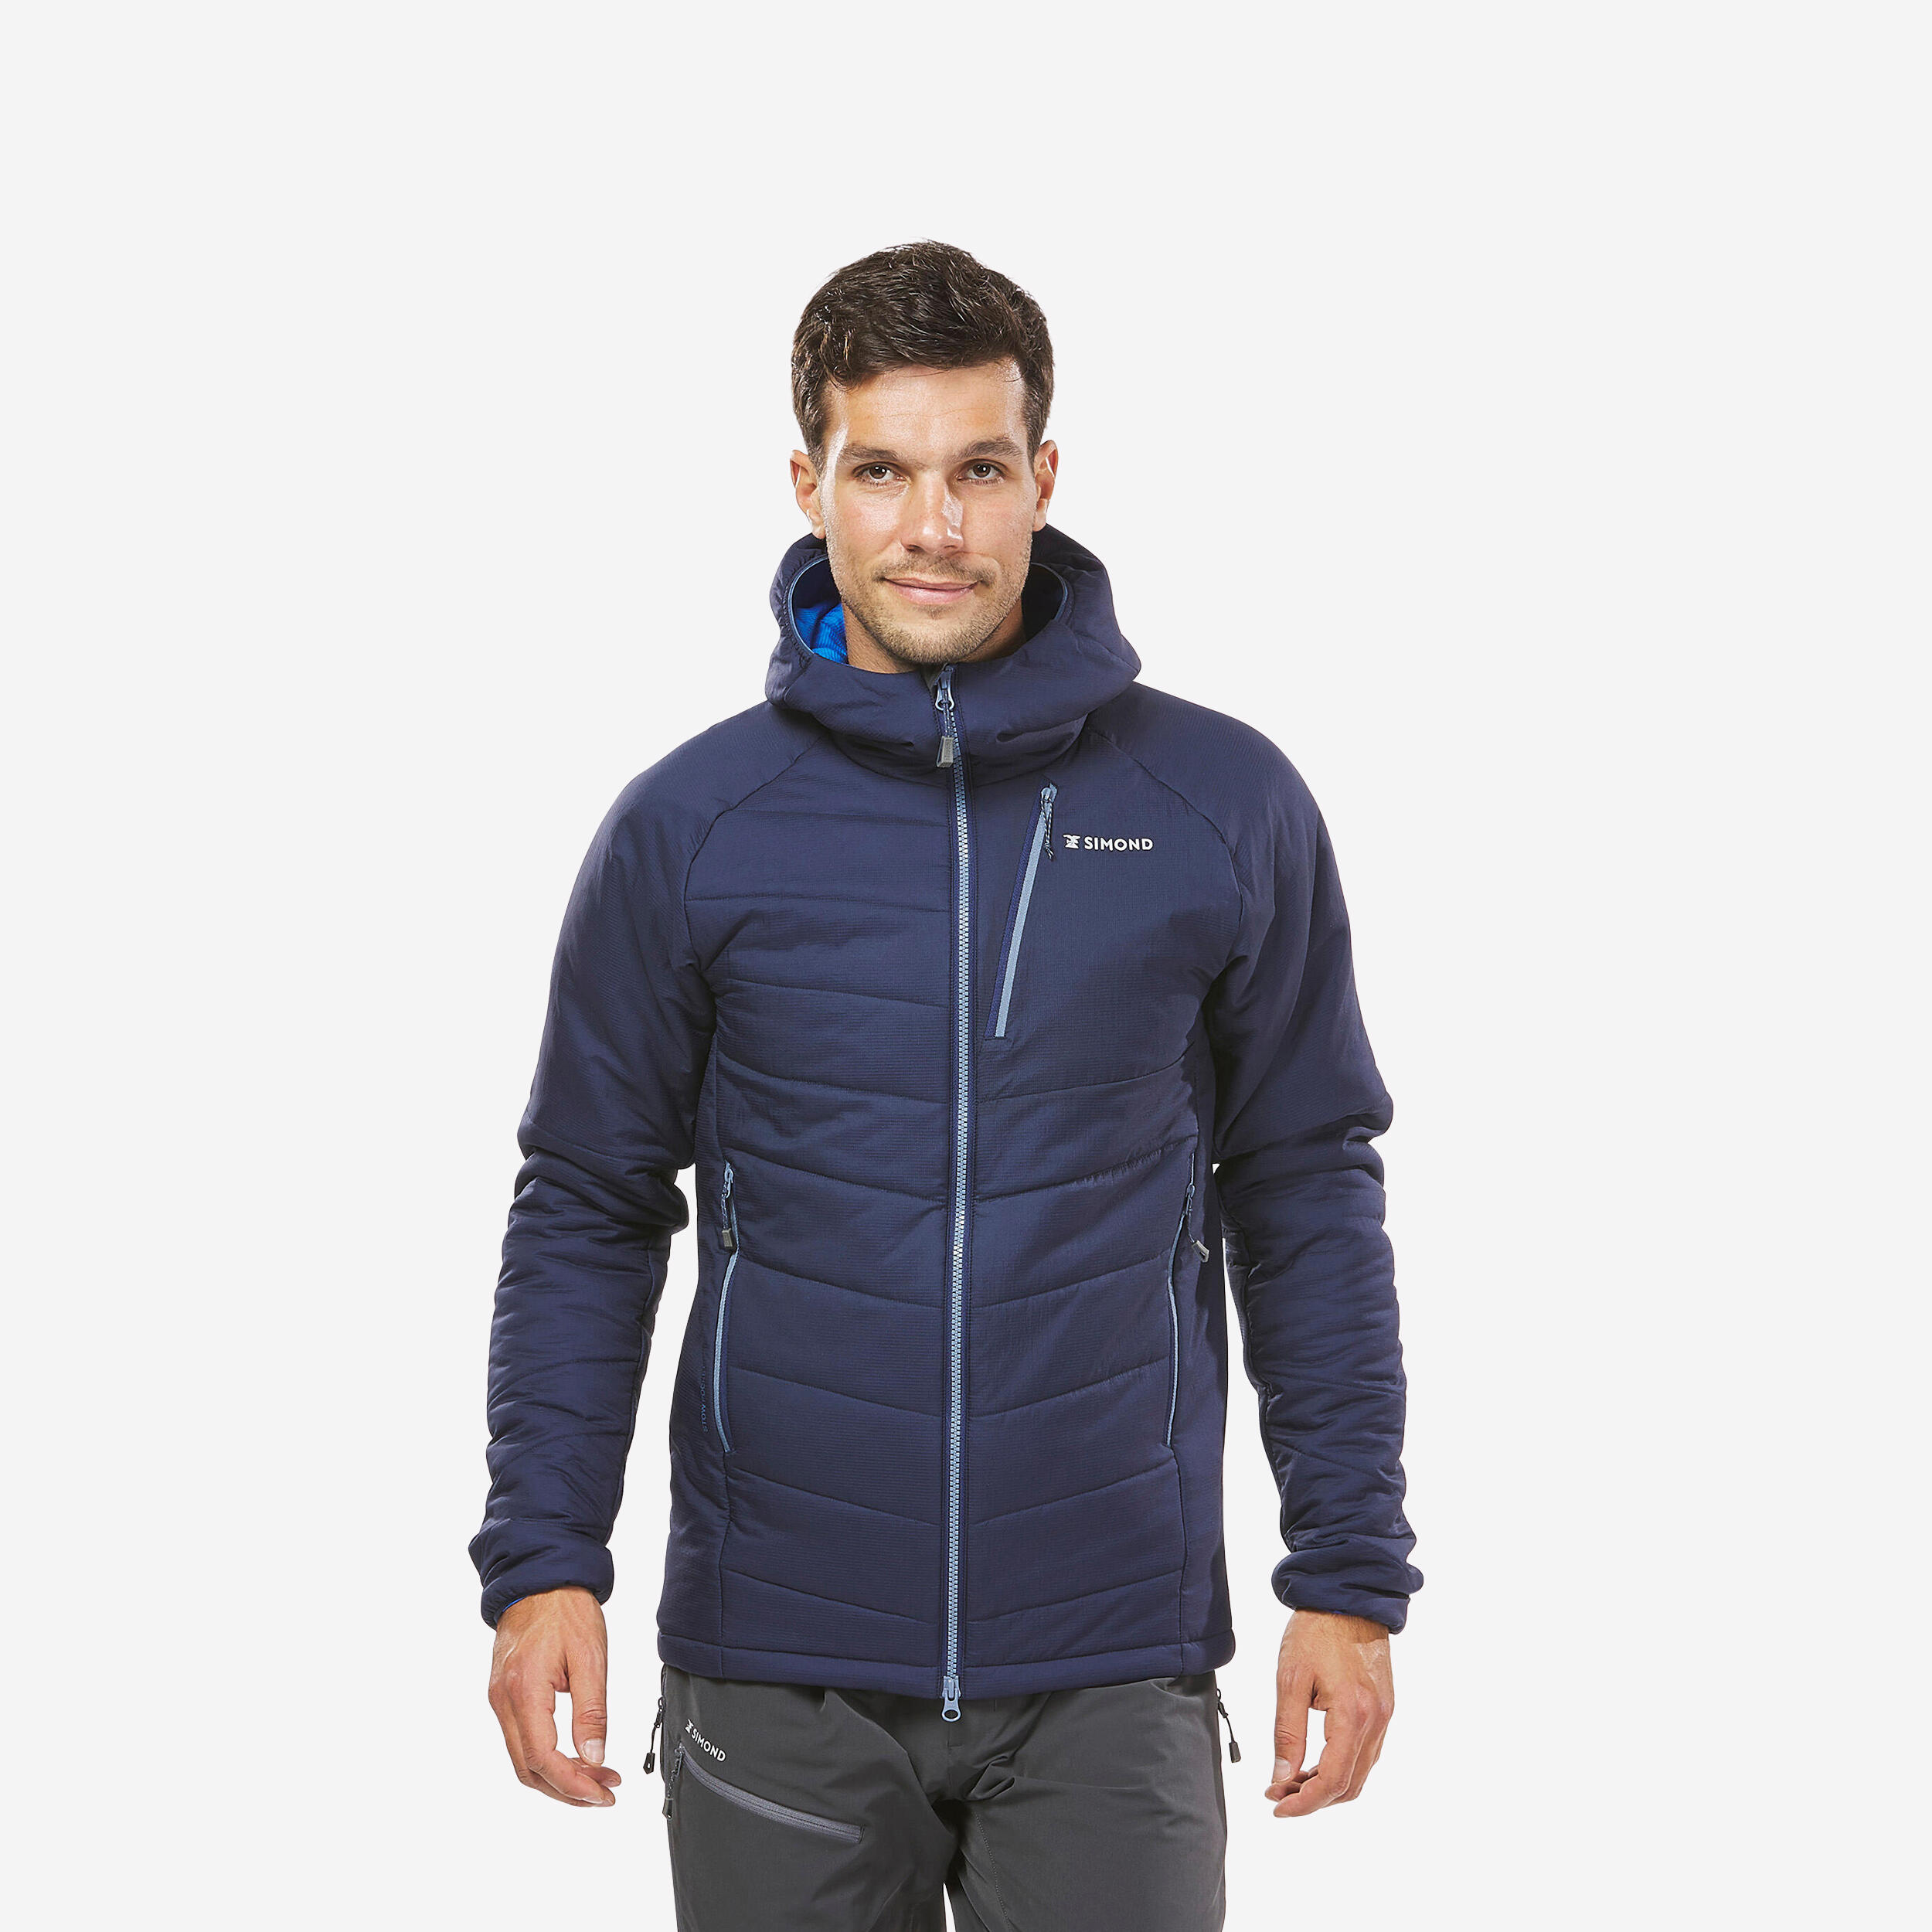 SIMOND Men’s compressible padded mountaineering jacket, navy